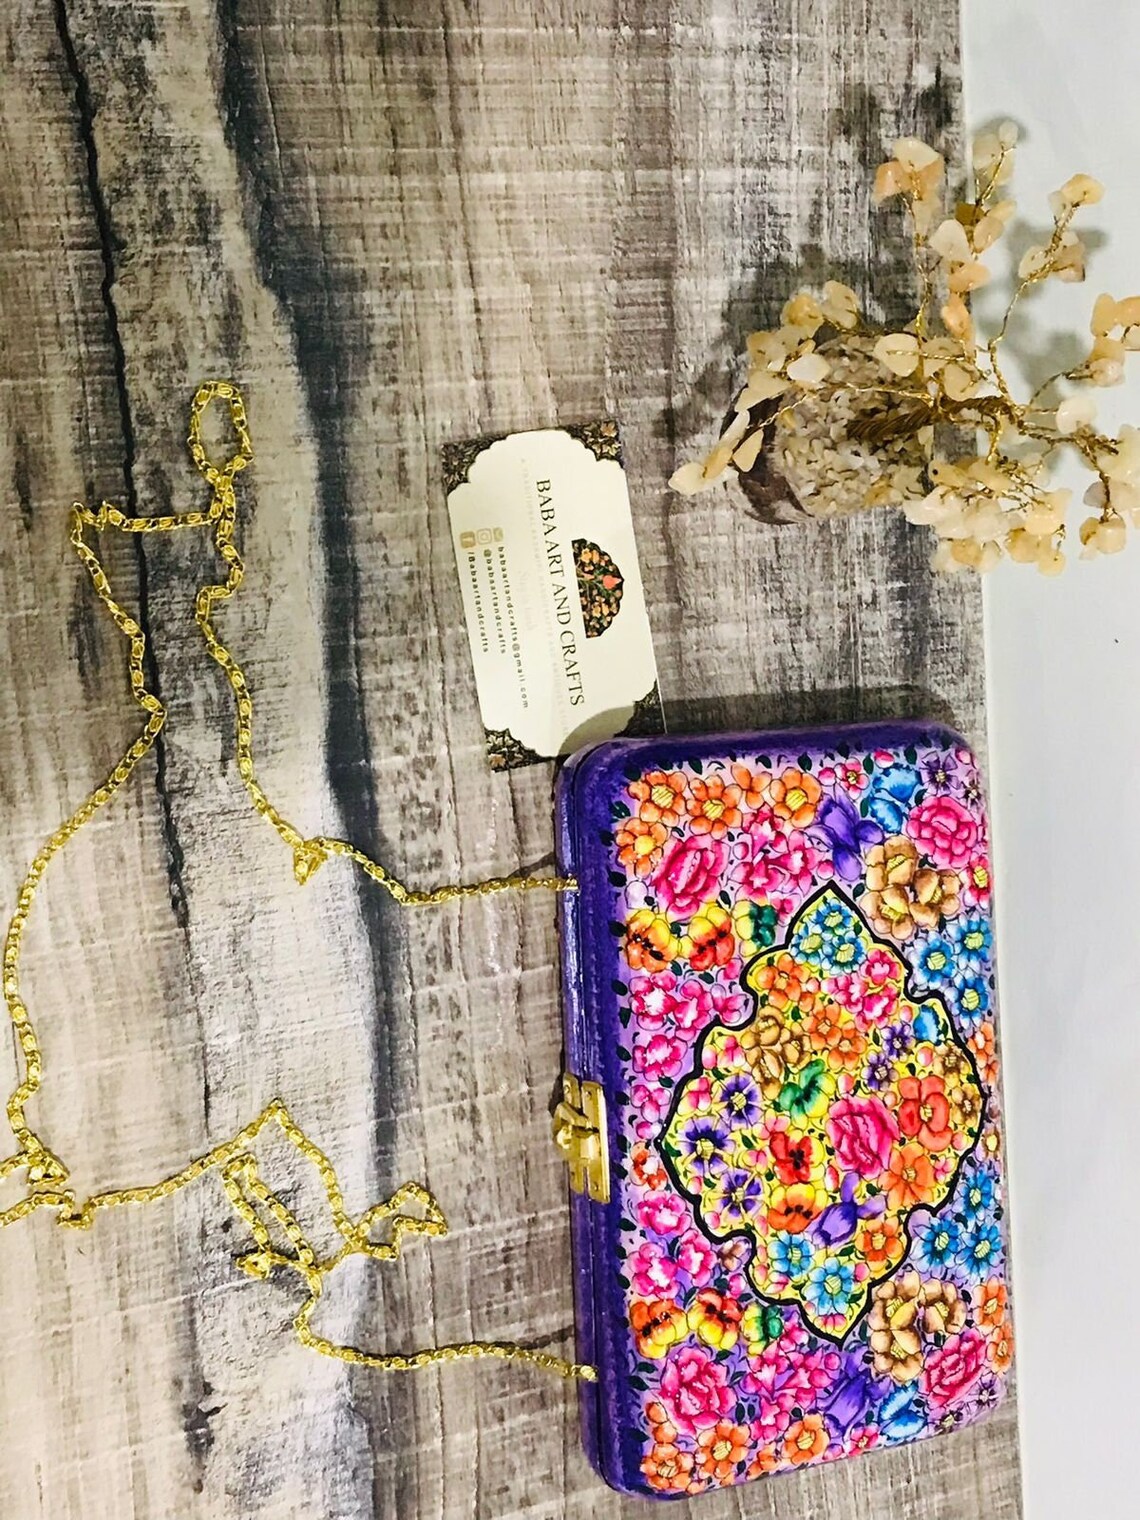 Boho Wallets., Luxury bags, Clutches with hand painted paper mache art, Papier mache clutches from Kashmir